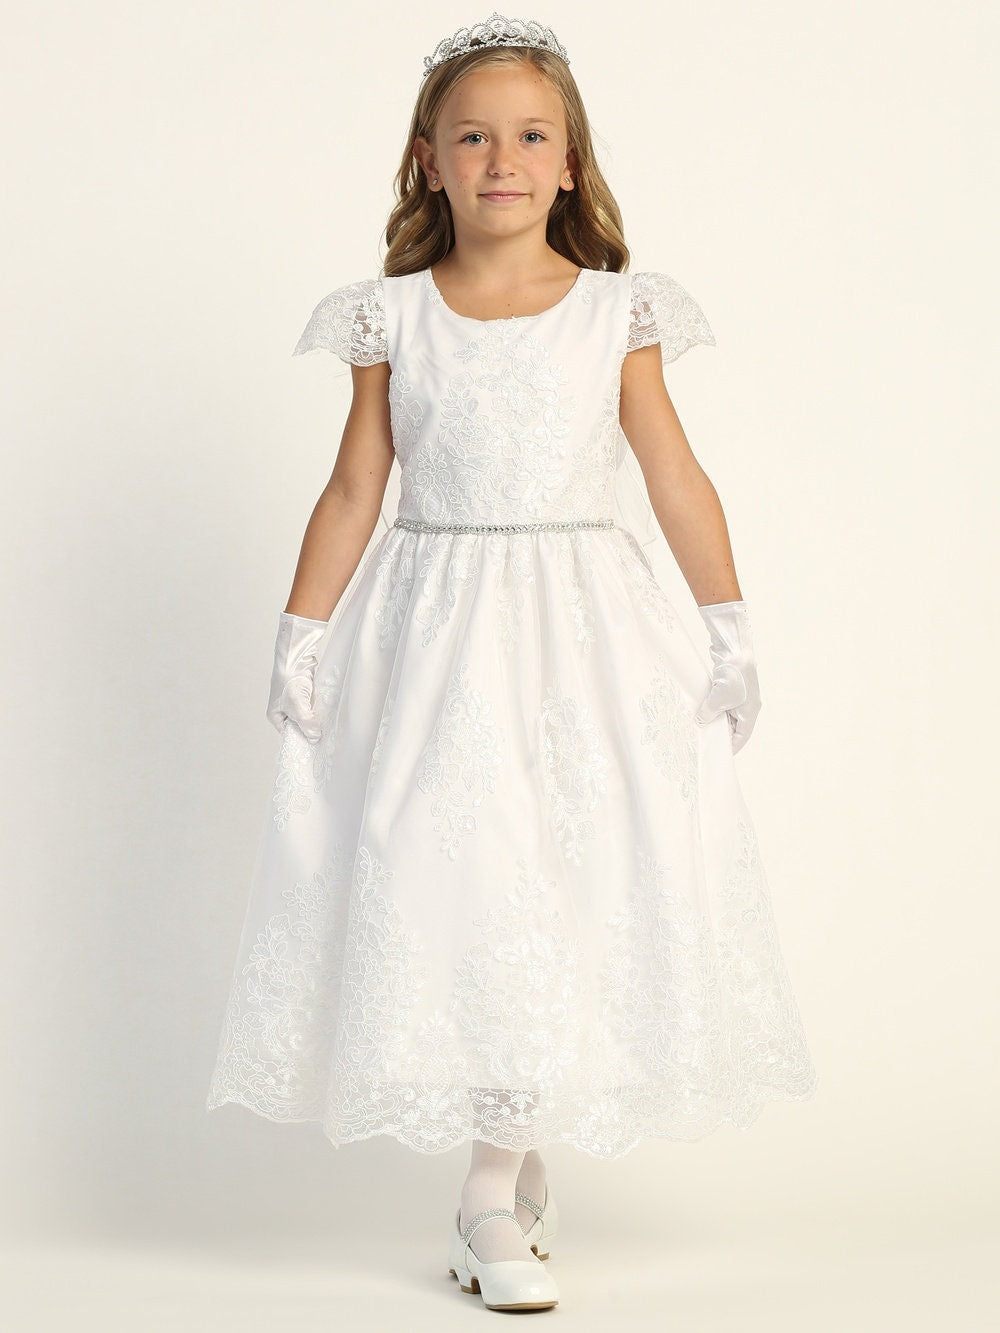 A girl wearing a stunning white First Communion Dress with corded embroidered tulle and sequins.